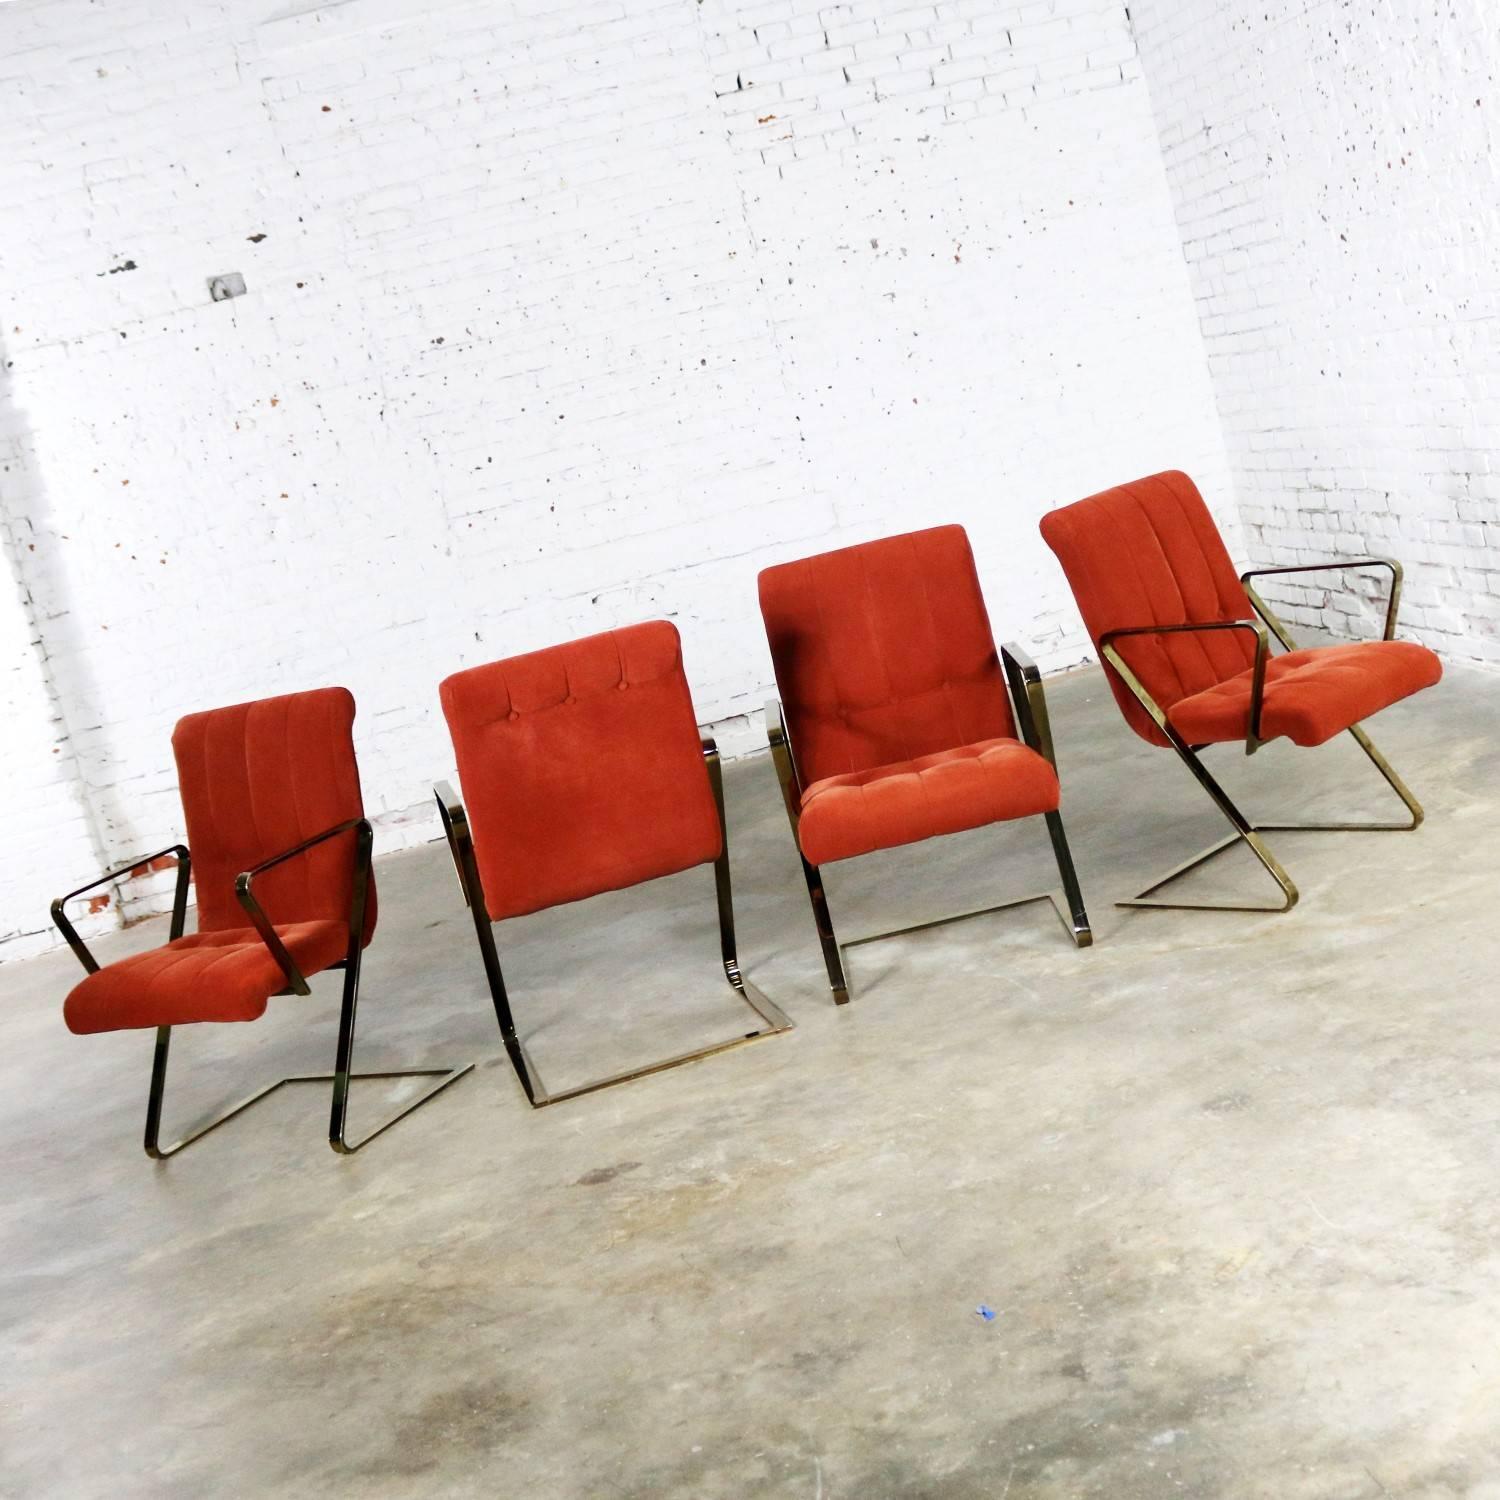 Handsome set of four Z frame cantilevered Milo Baughman style dining chairs in burnt orange velvet and brass plated flat bar frames. They are in wonderful vintage condition. The brass plating has minor scratching and may have some minor spots where